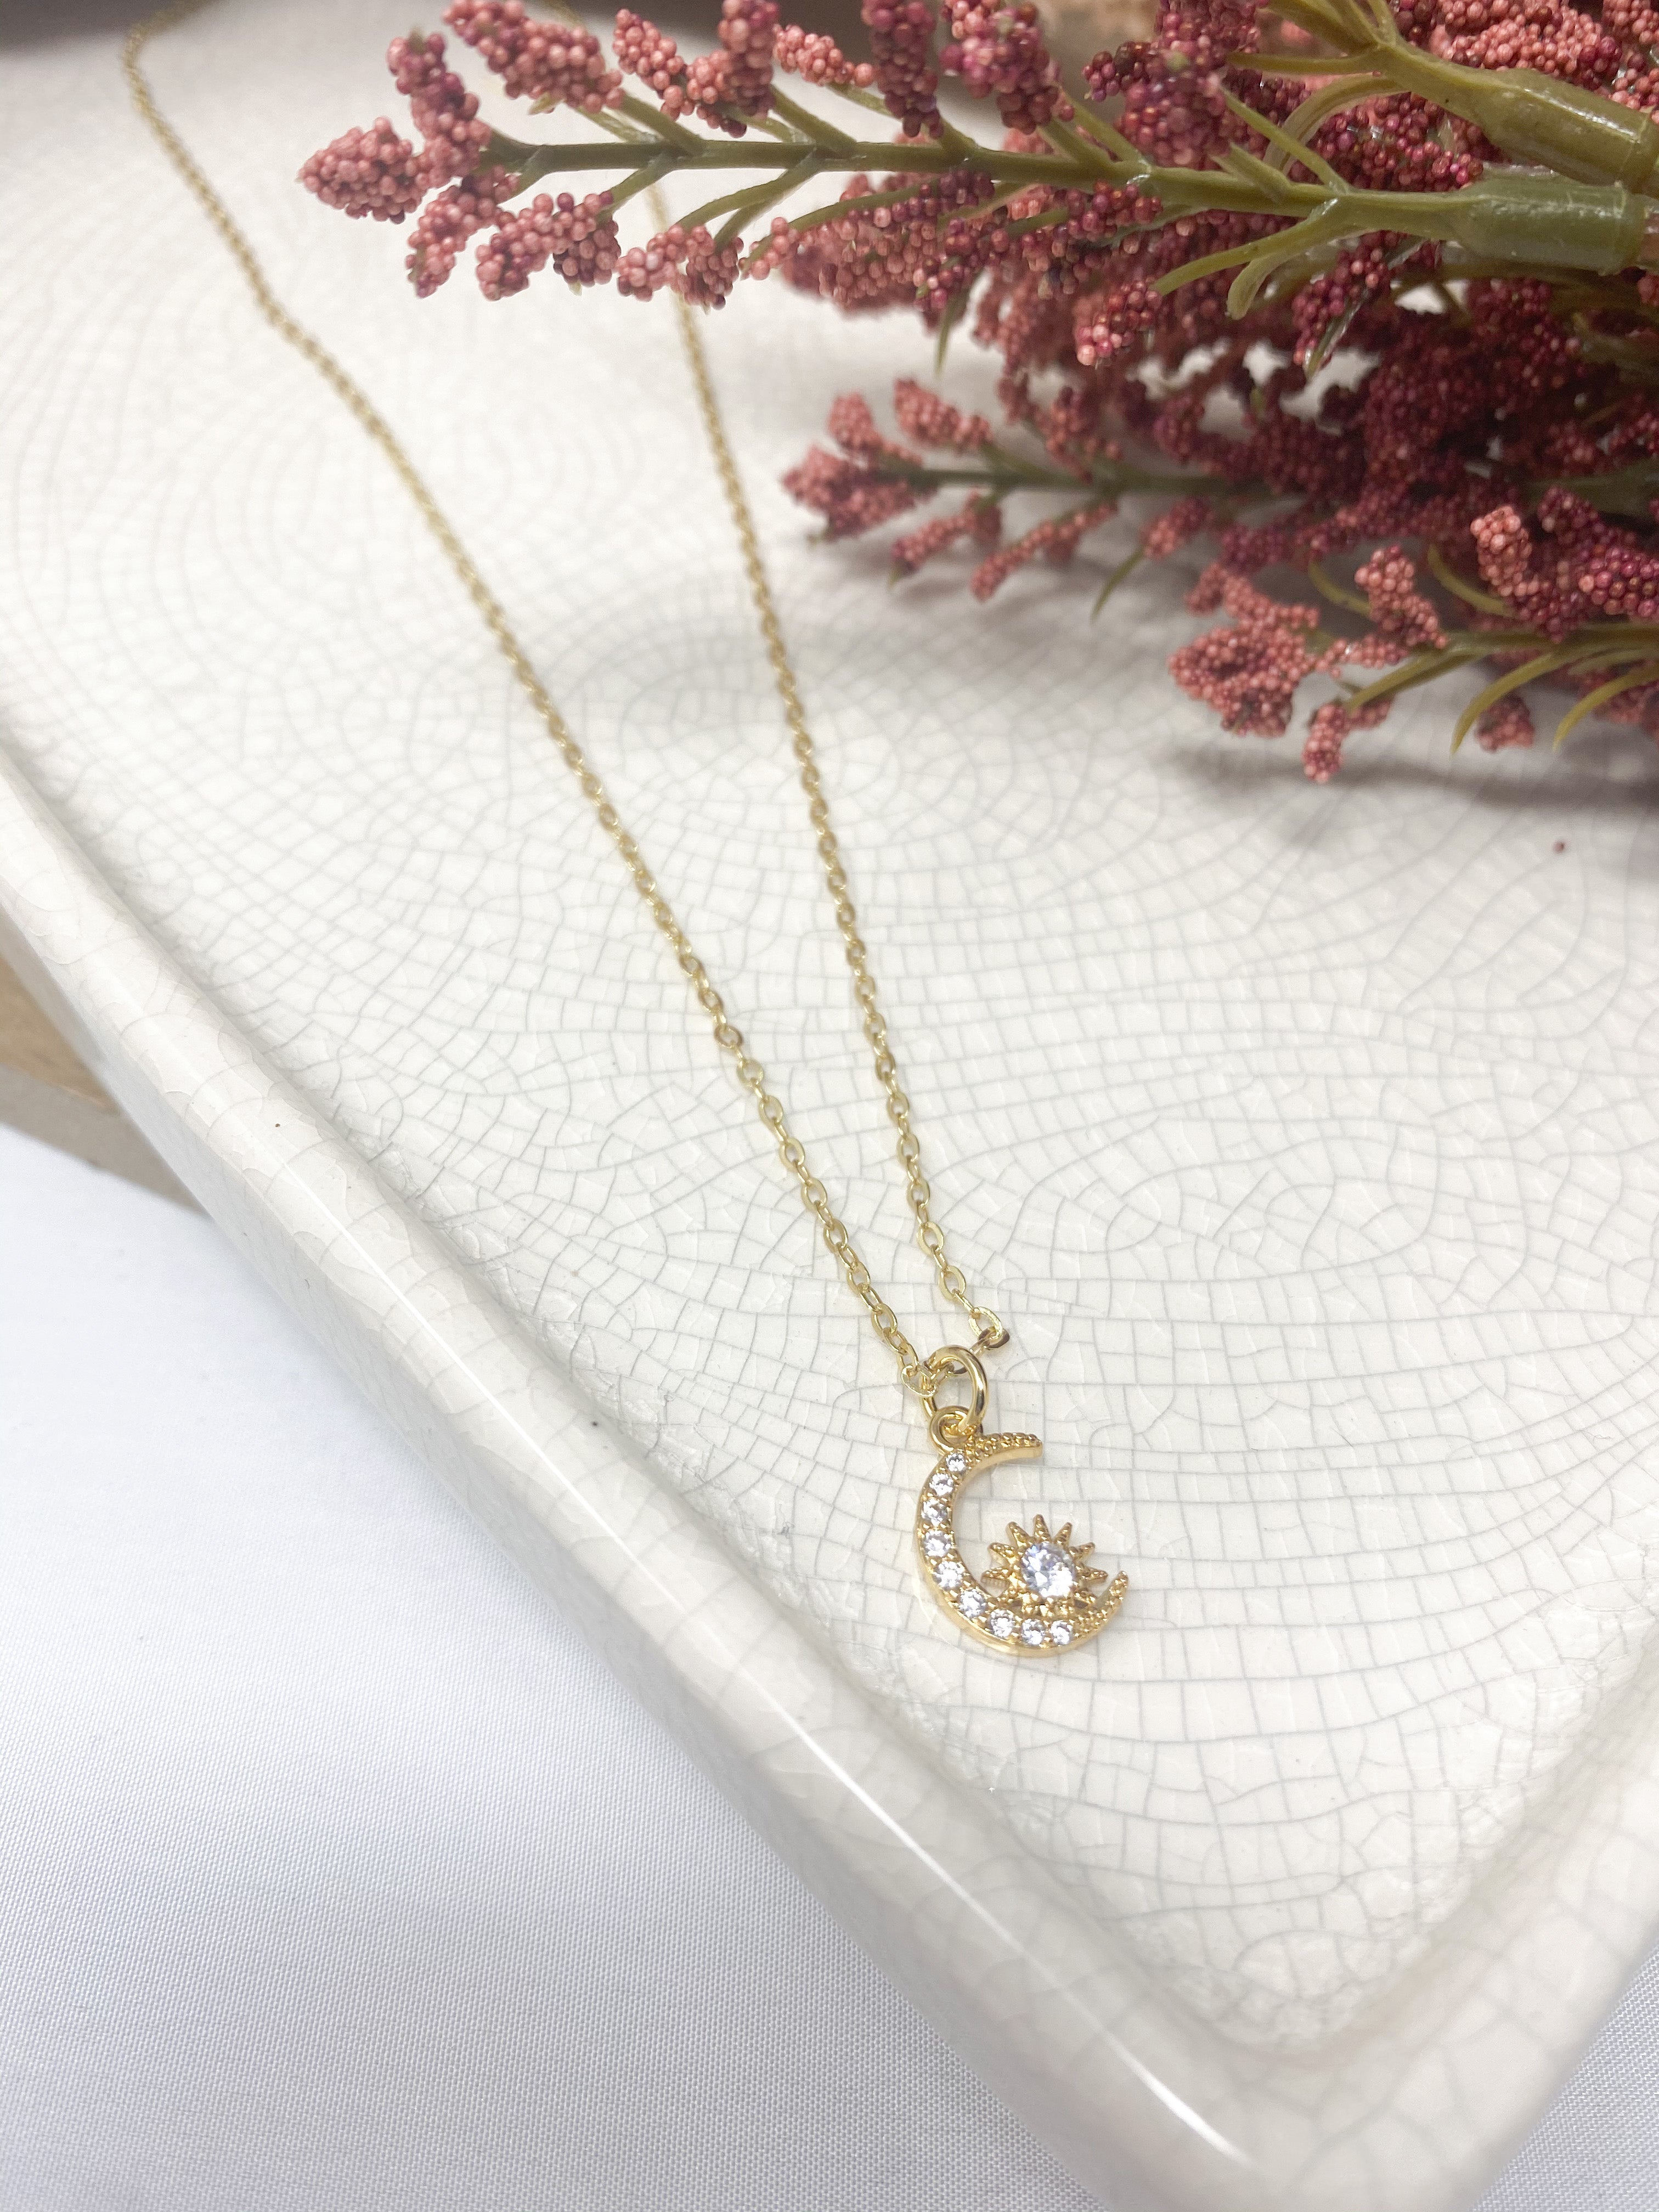 Take a closer look at our dazzling Gold Filled Charms 😍✨ #goldfilledcharms  #goldfilledjewelry 